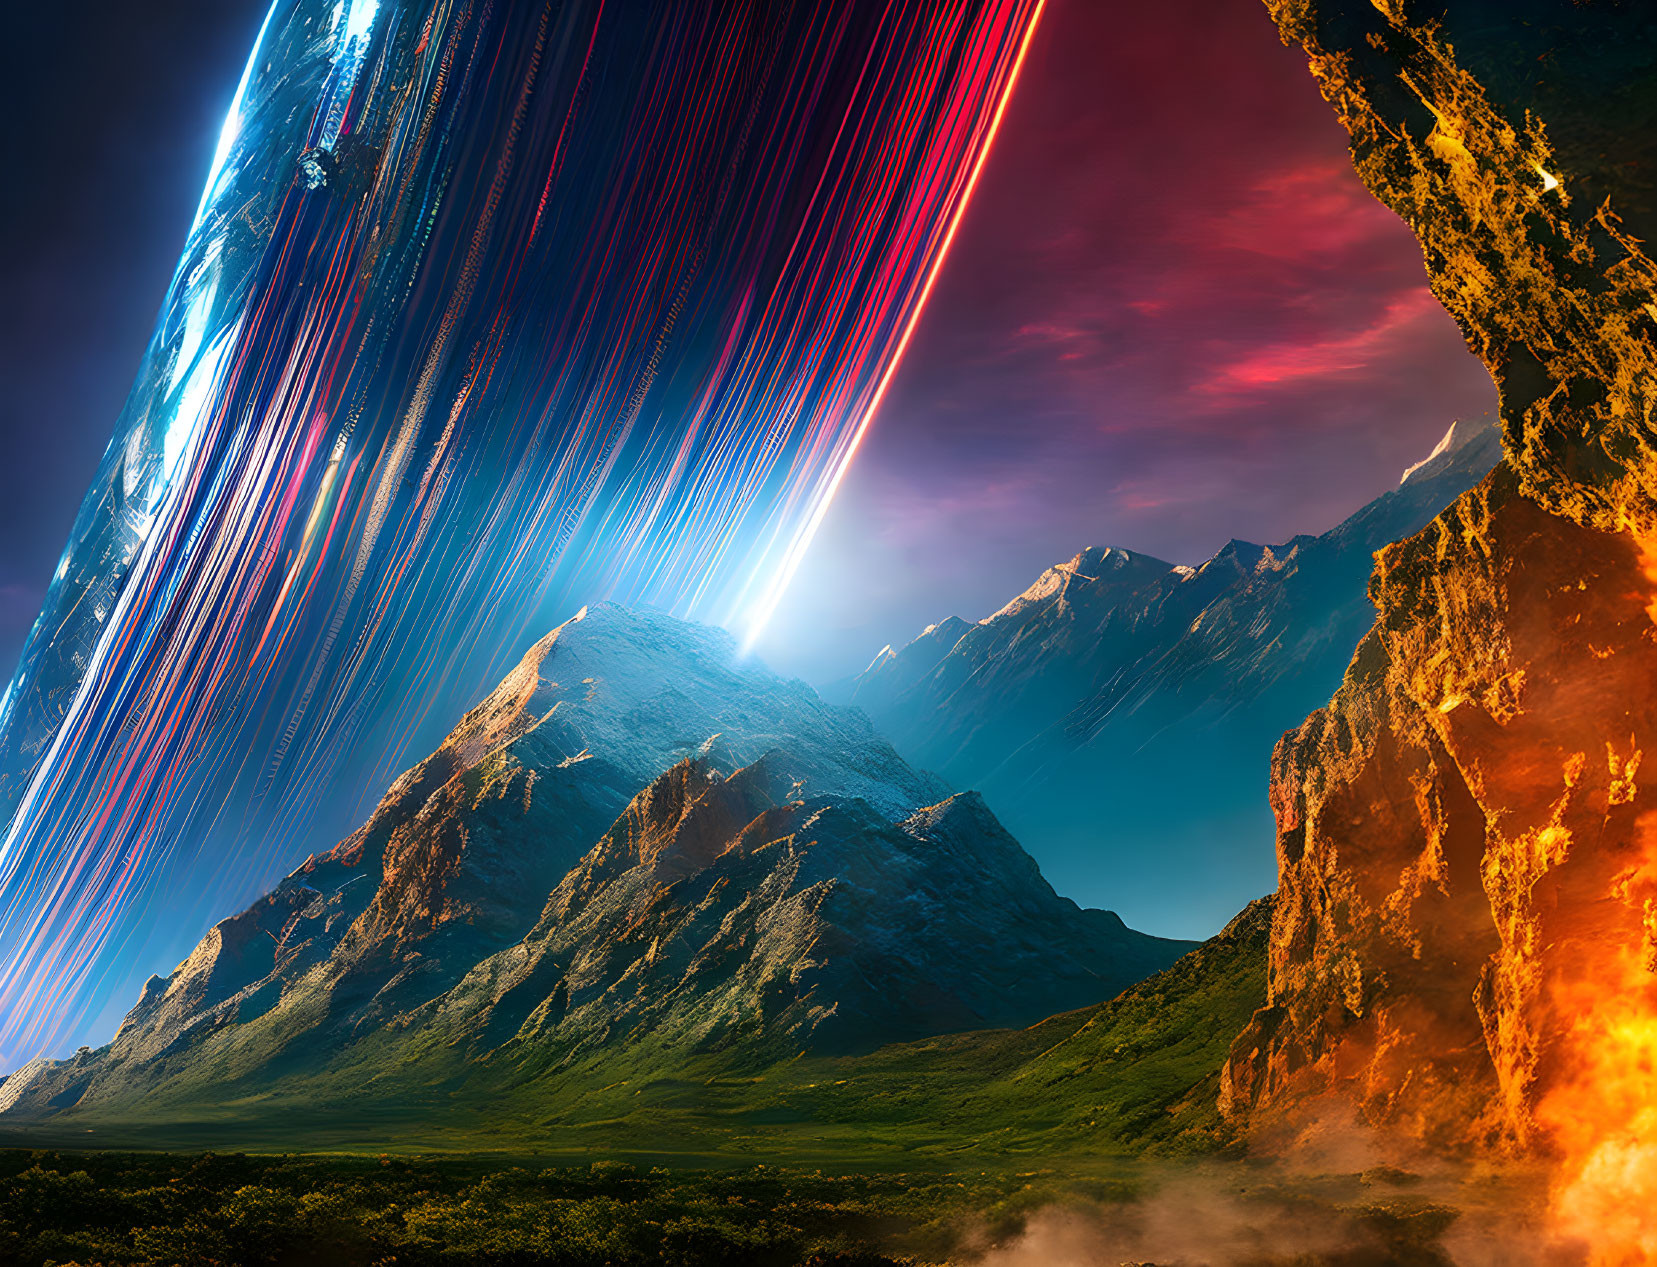 Vibrant sci-fi landscape with mountain range and fiery asteroid in contrasting environments